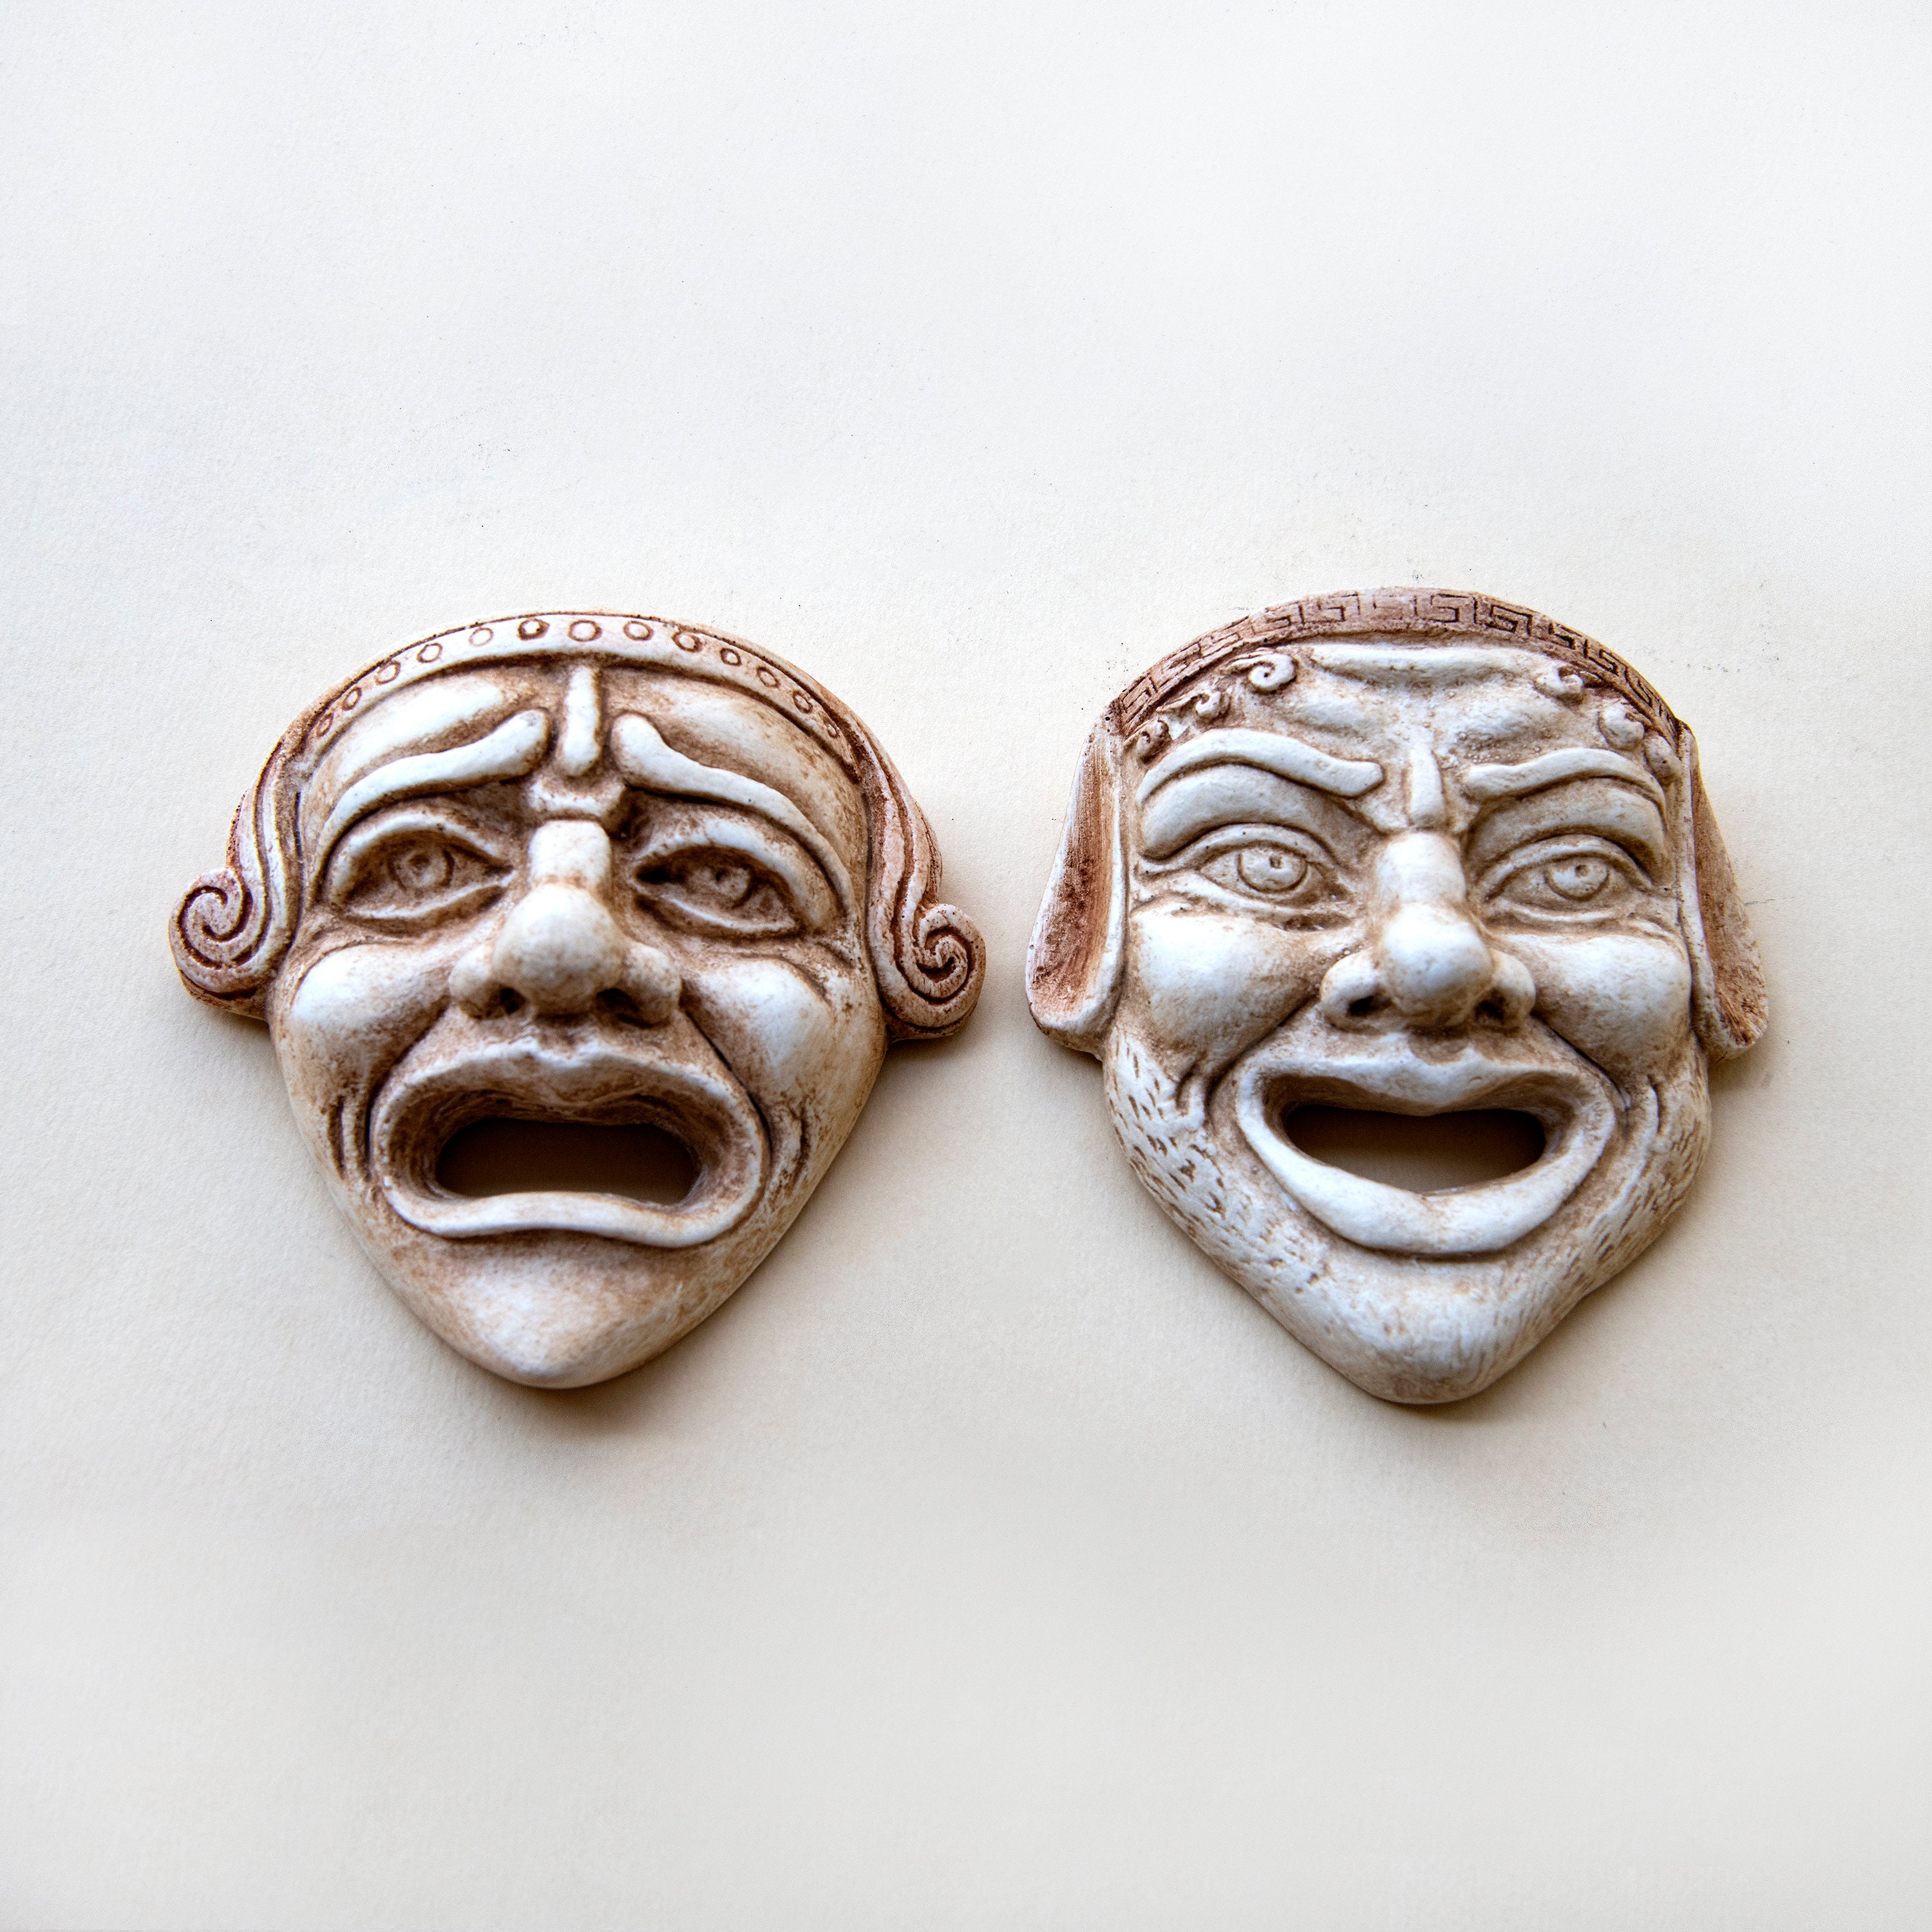 Ancient Greek Drama Theater Masks, Set of 2 Comedy/tragedy Actors